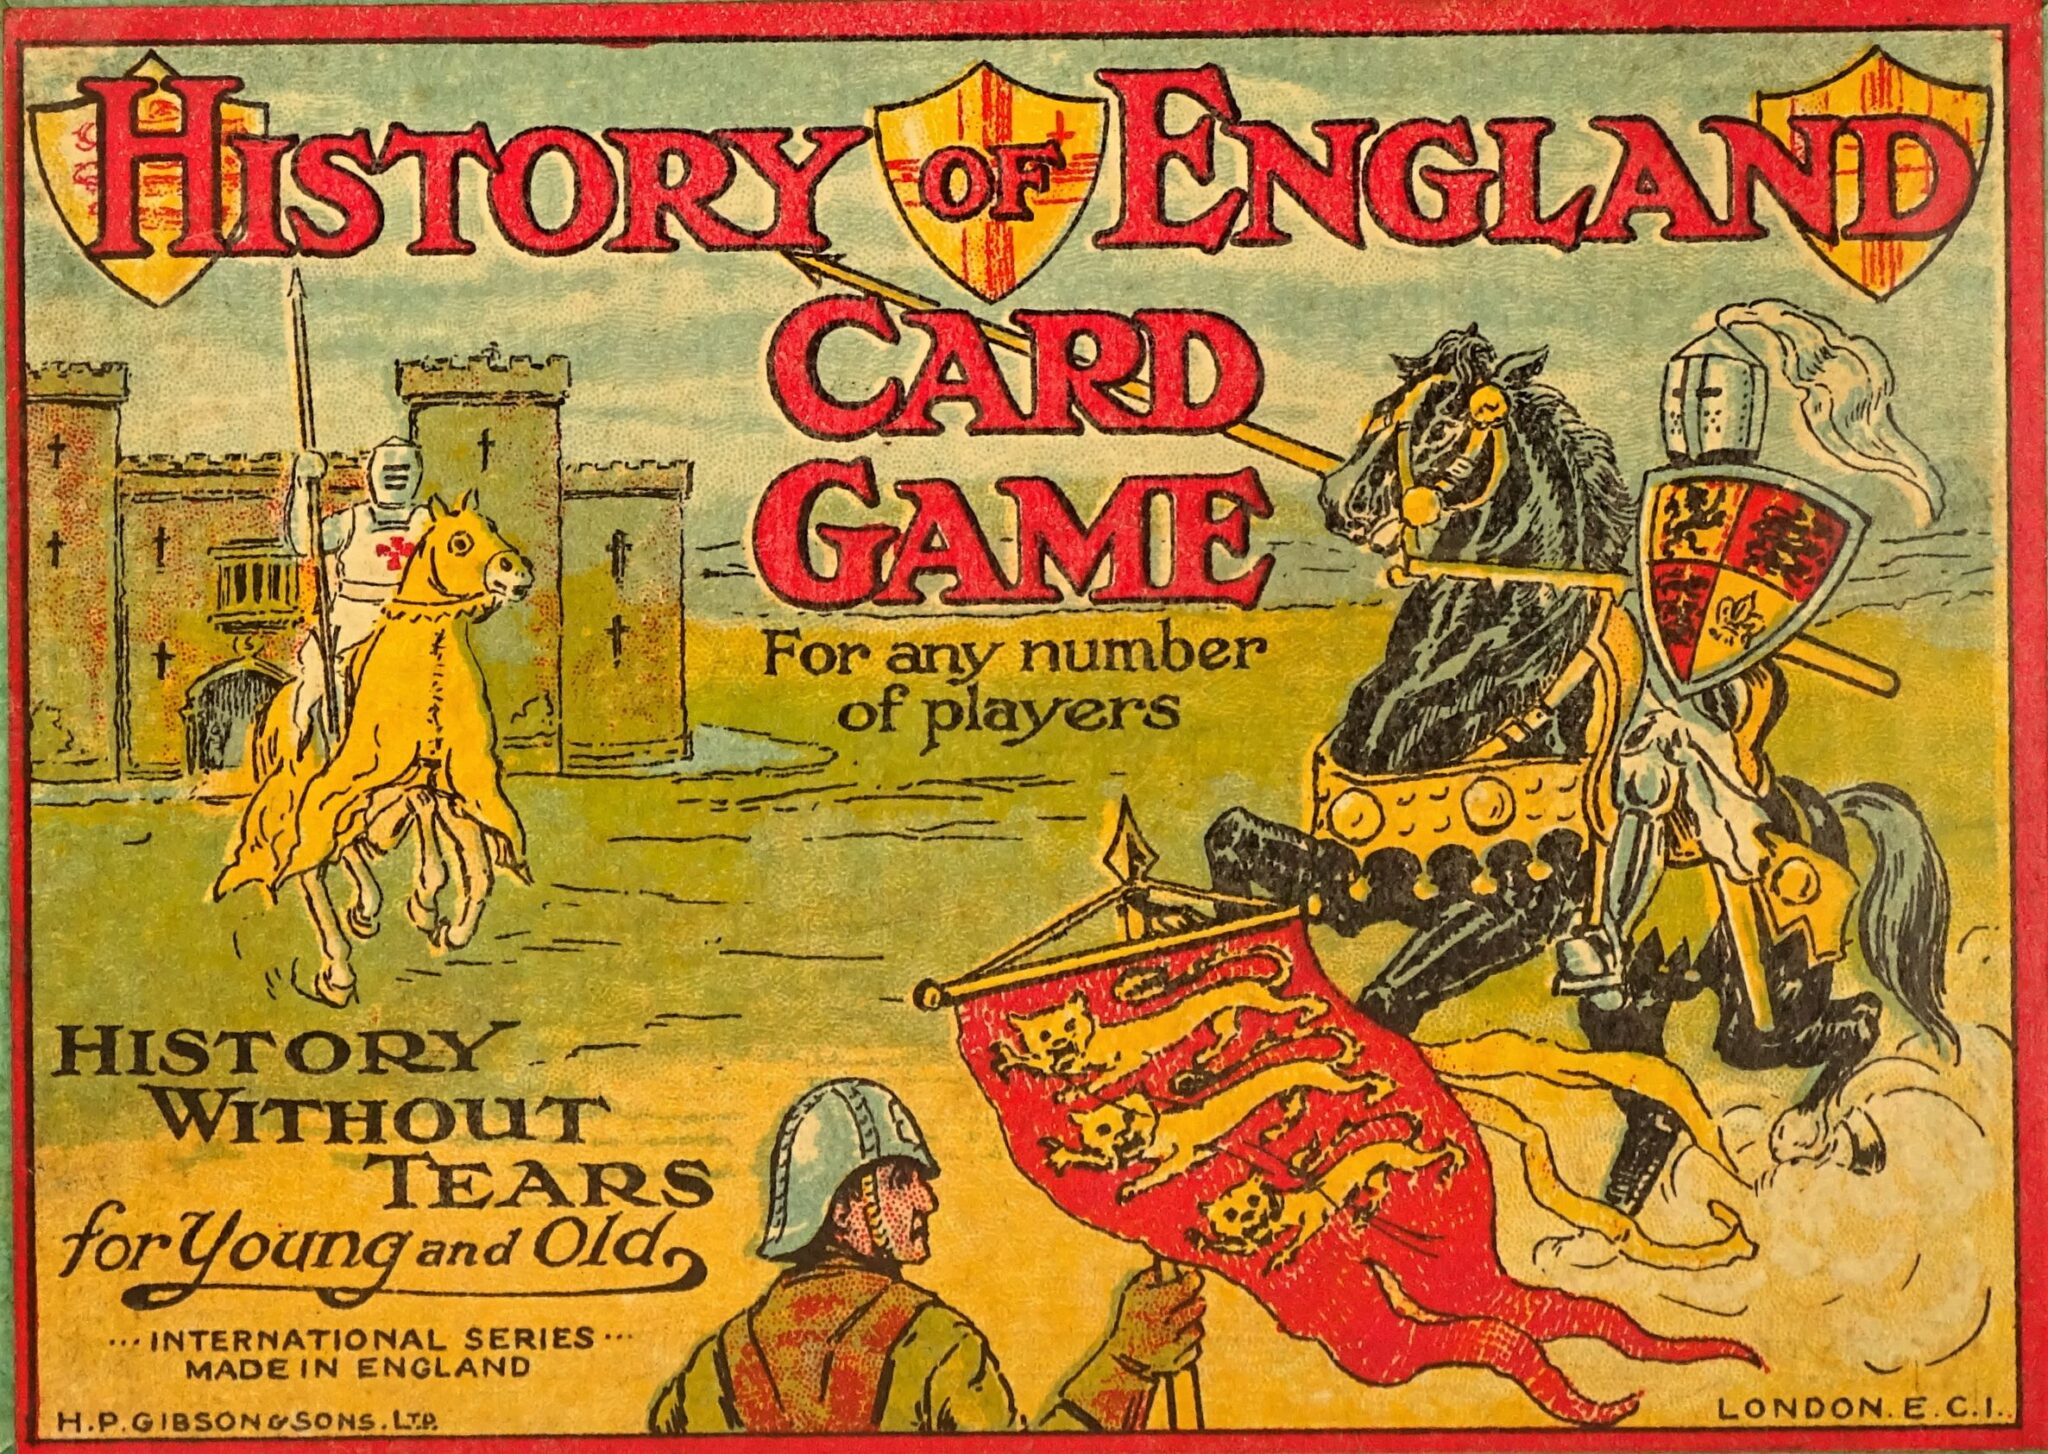 1920-s-history-of-england-card-game-by-h-p-gibson-sons-ltd-london